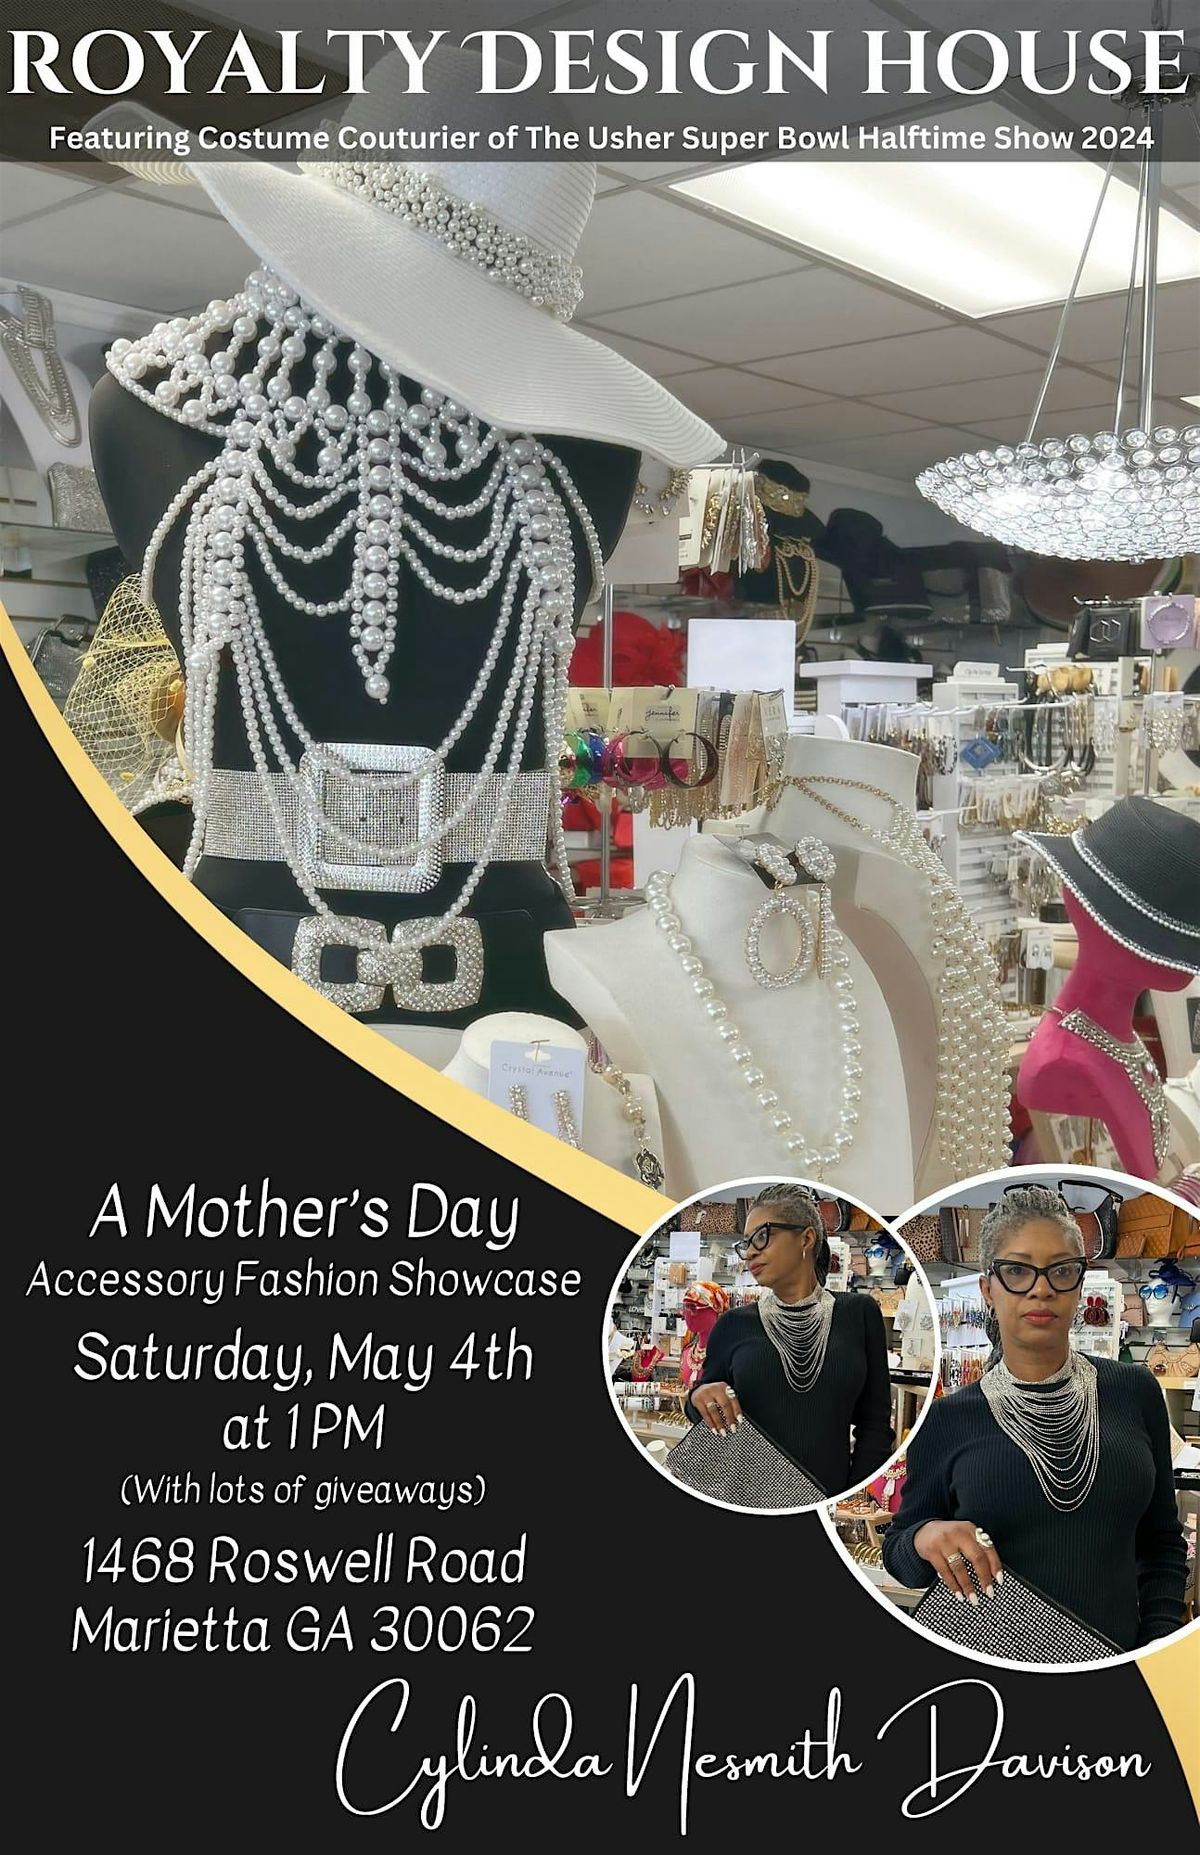 A Mother's Day Accessory Fashion Showcase presented by Royalty Design House